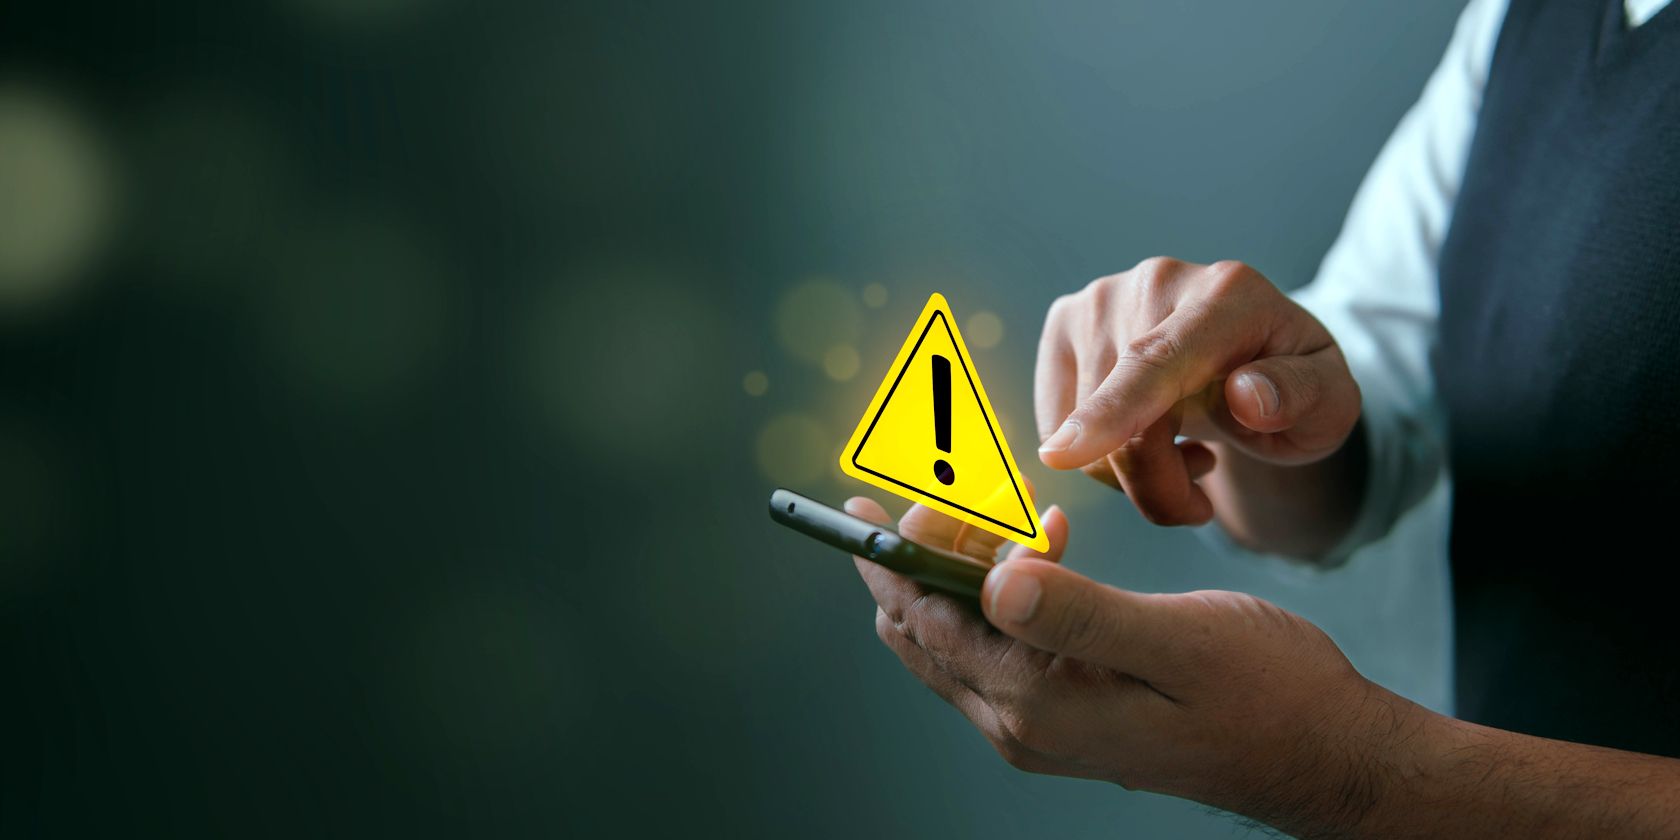 man using smartphone with yellow warning sign pop up